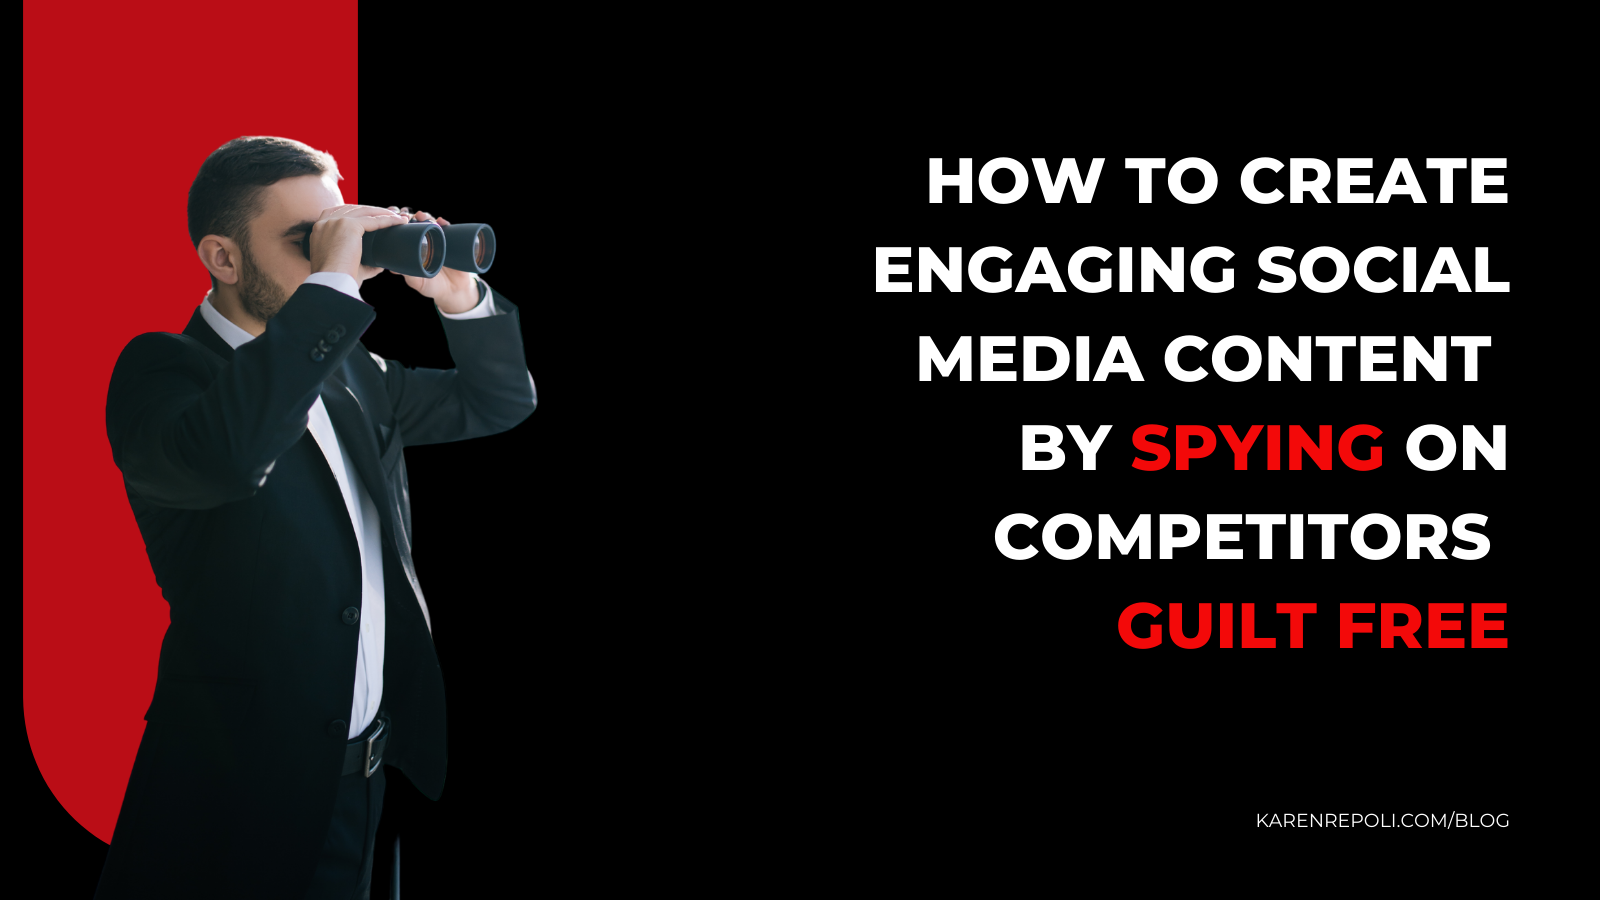 Spying on Competitors